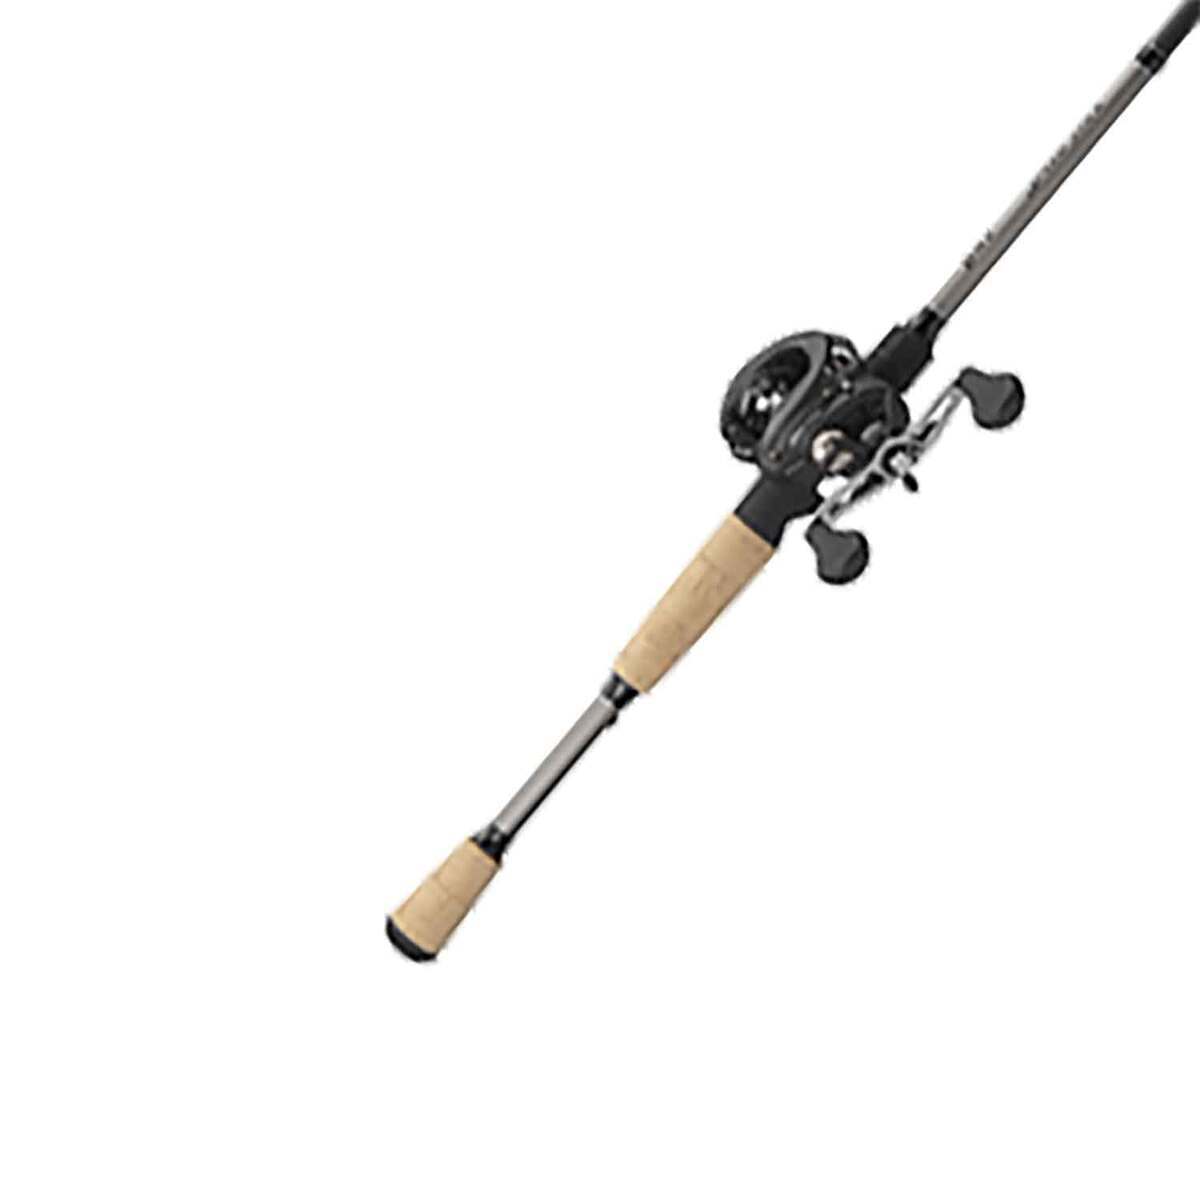 Cheap Baitcast Rod Reel Combo with 2.1m/2.4m M Power Travel Casting Fishing  Rod and 11+1BB Baitcaster Reel